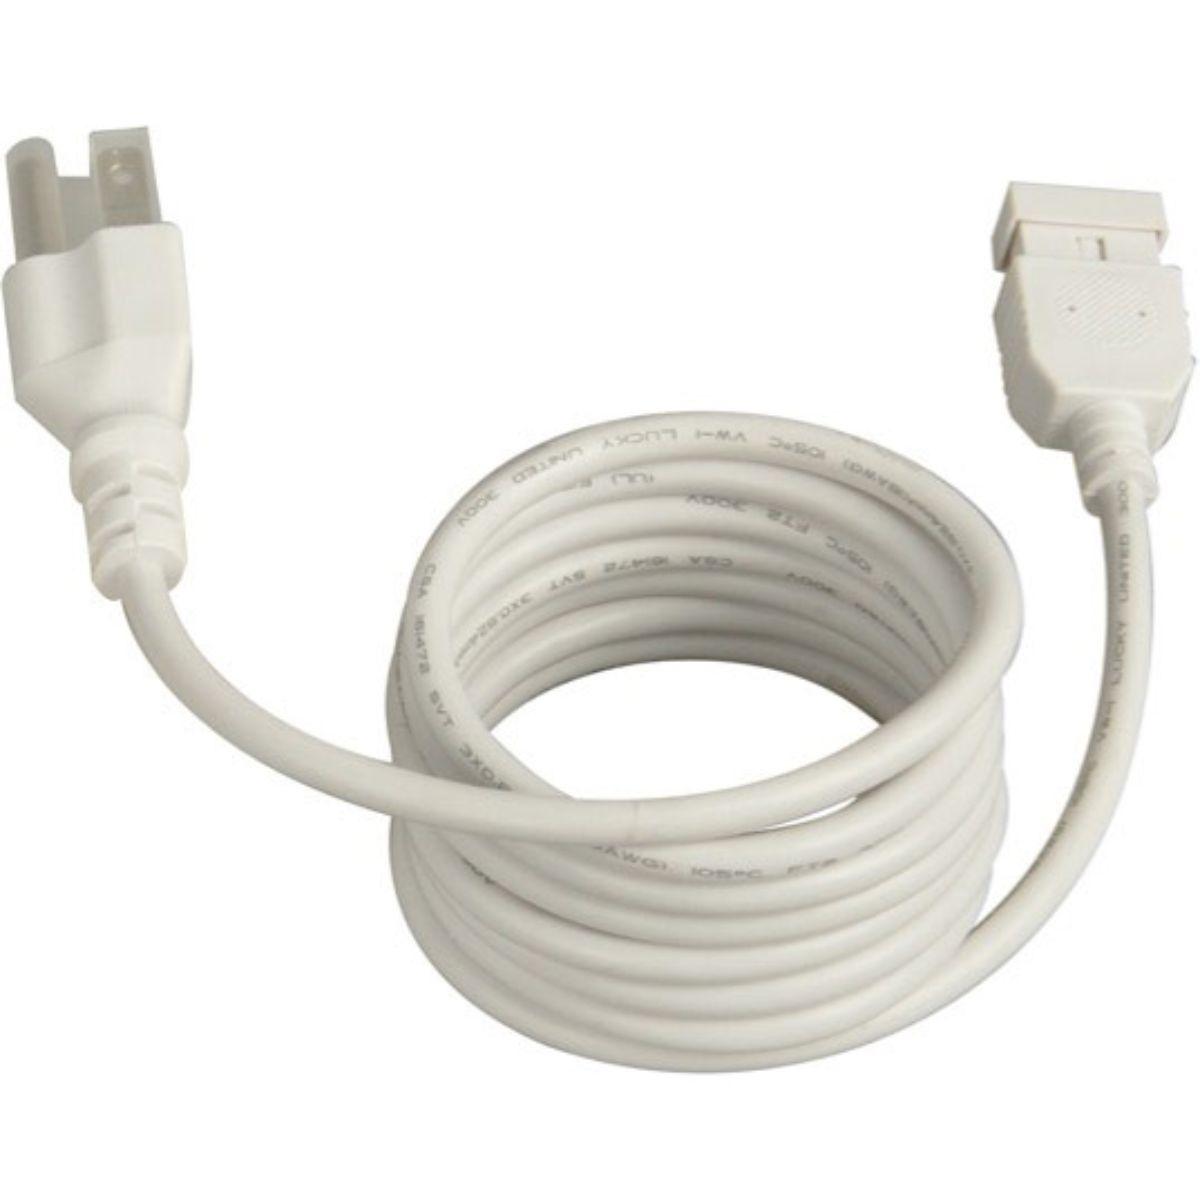 CounterMax 72in. Power Cord, White - Bees Lighting